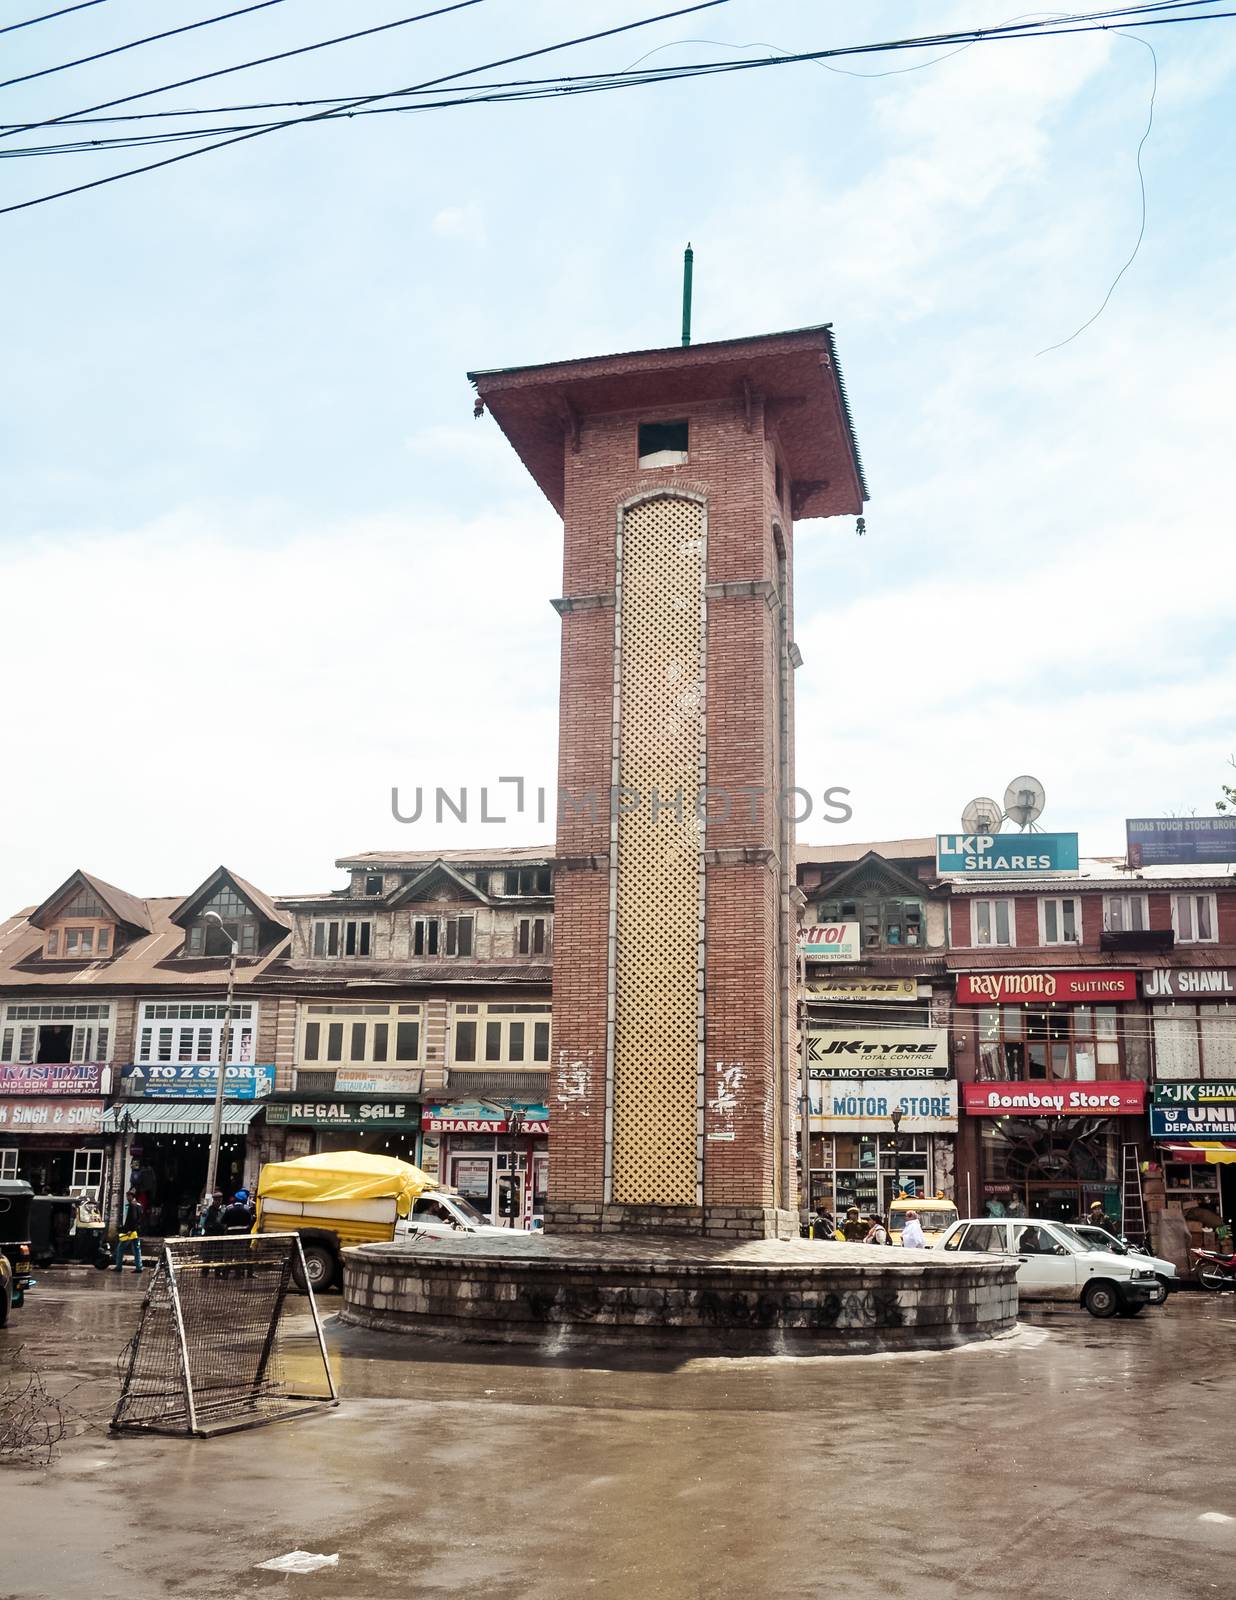 Lal Chowk Clock Tower (Red Square), Srinagar, Jammu - Kashmir, India 14 February 2019 - View of Lal Chowk, famous place for political meetings and most popular commercial shopping center in Srinagar